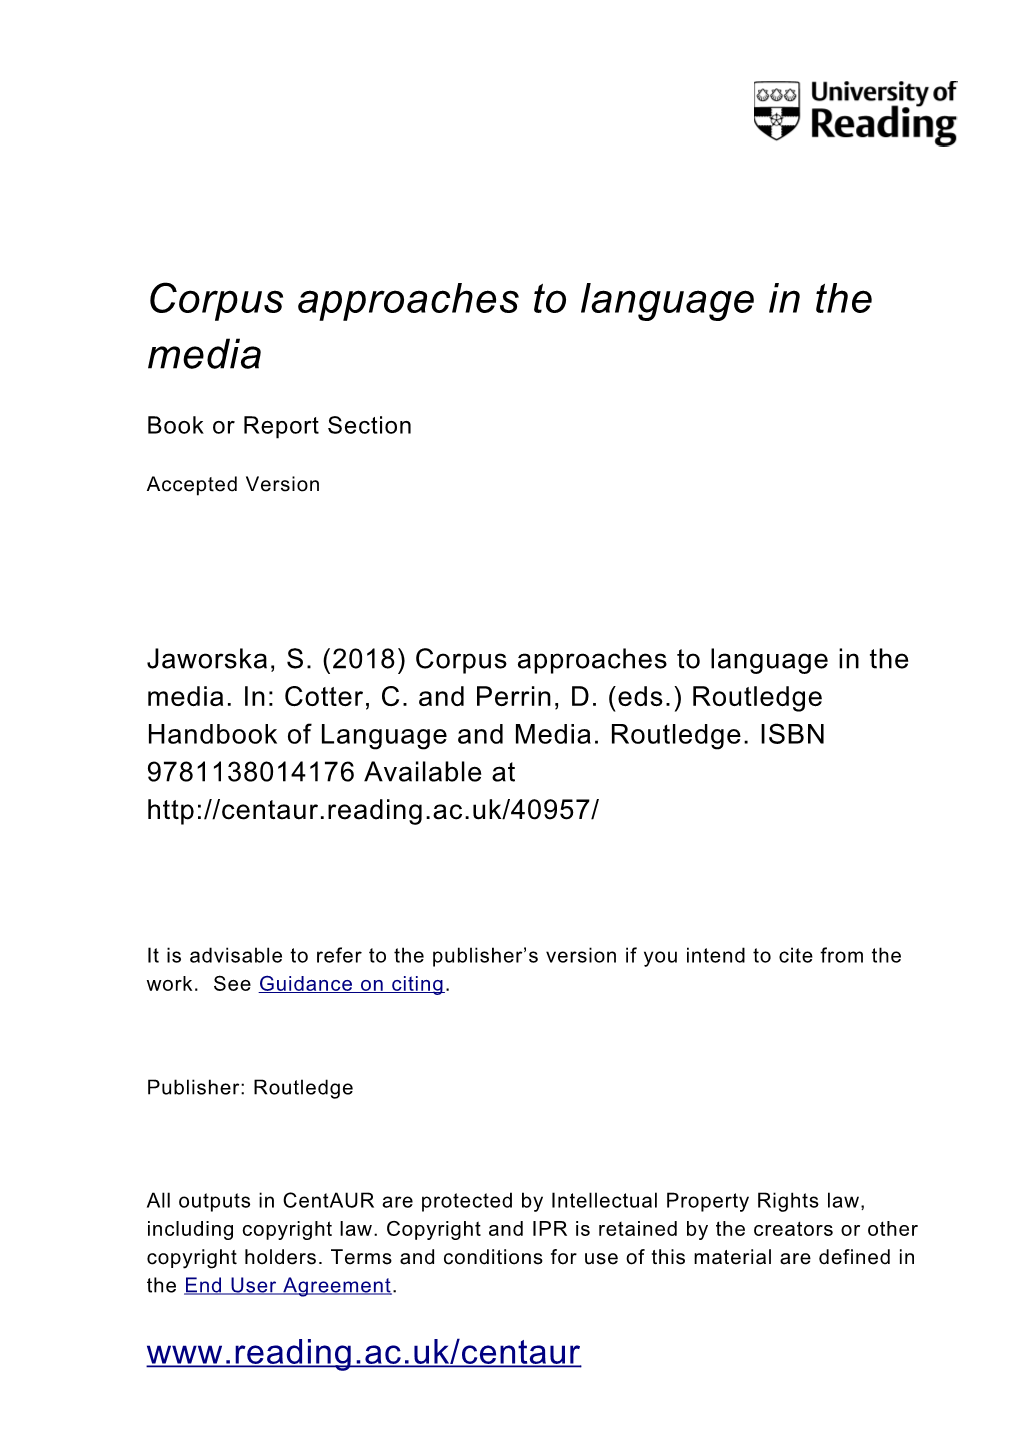 Corpus Approaches to Language in the Media